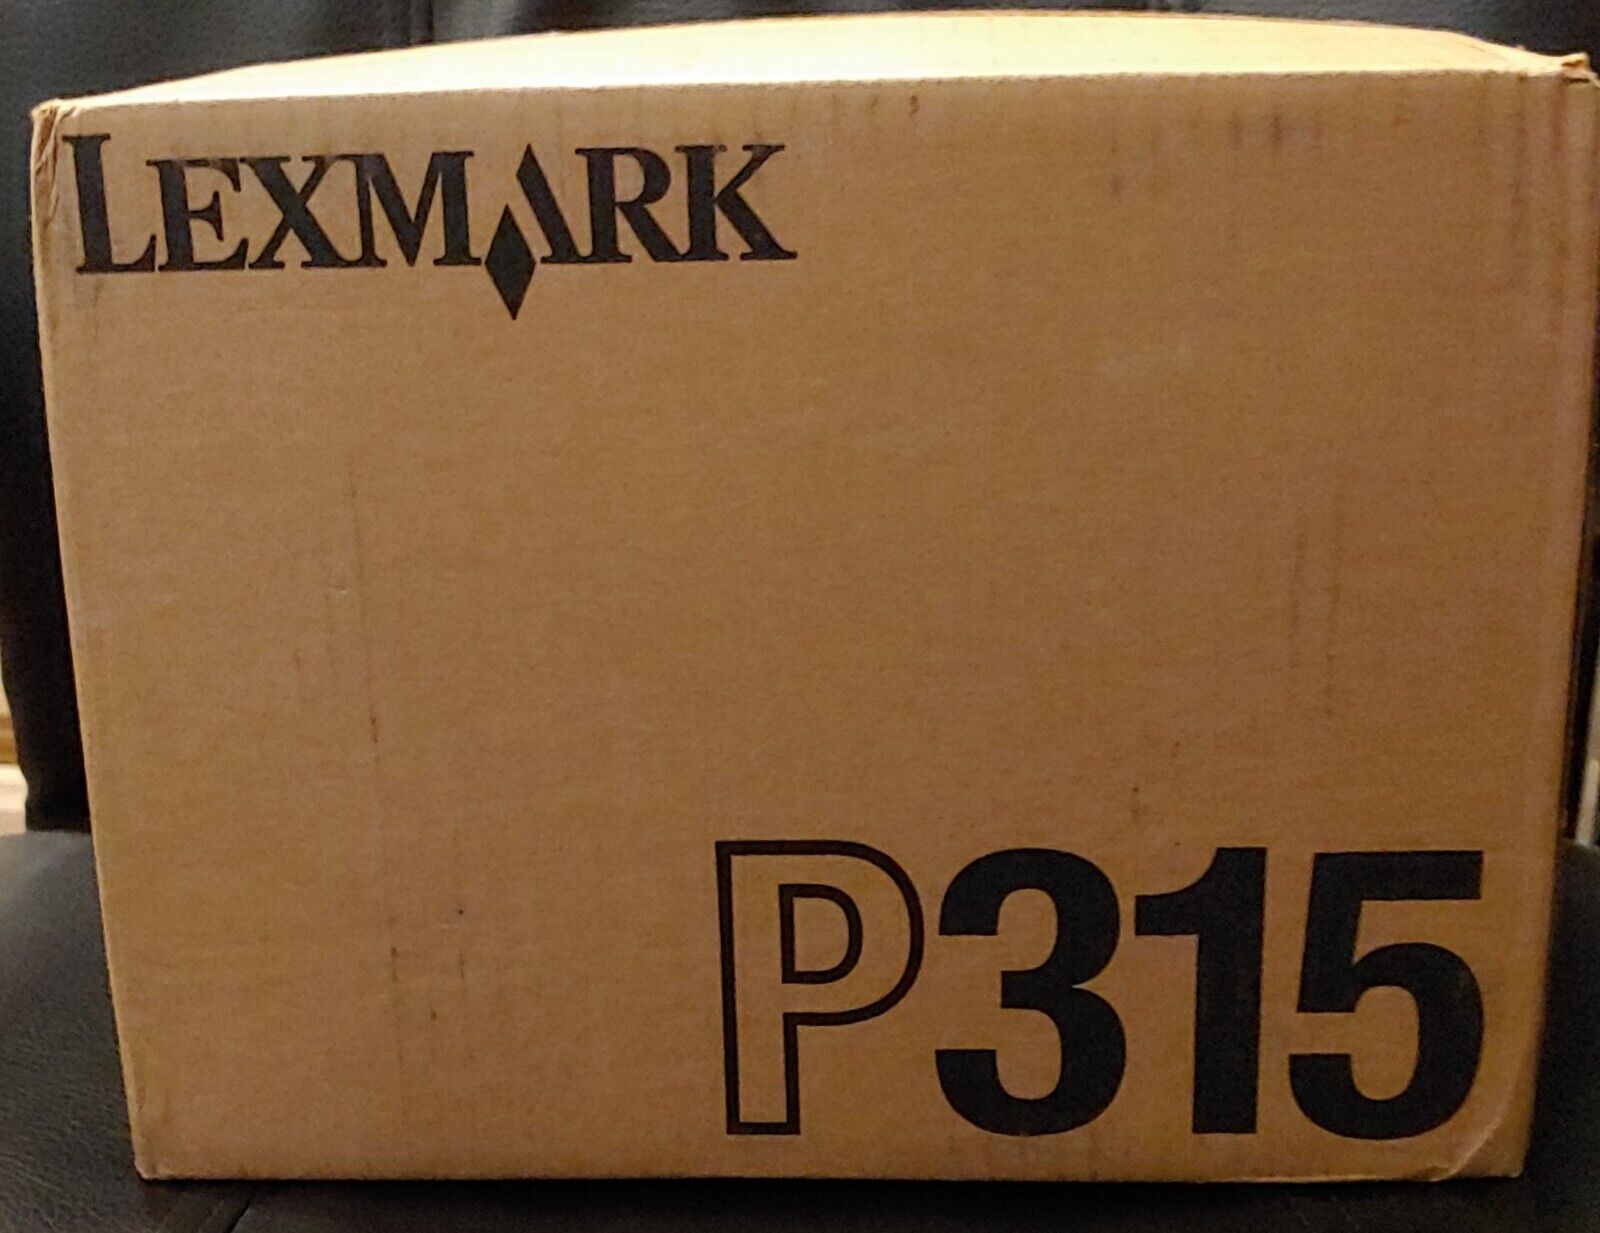 SEALED: AS SHIPPED FROM FACTORY - Lexmark P315 Digital Photo Inkjet Printer READ